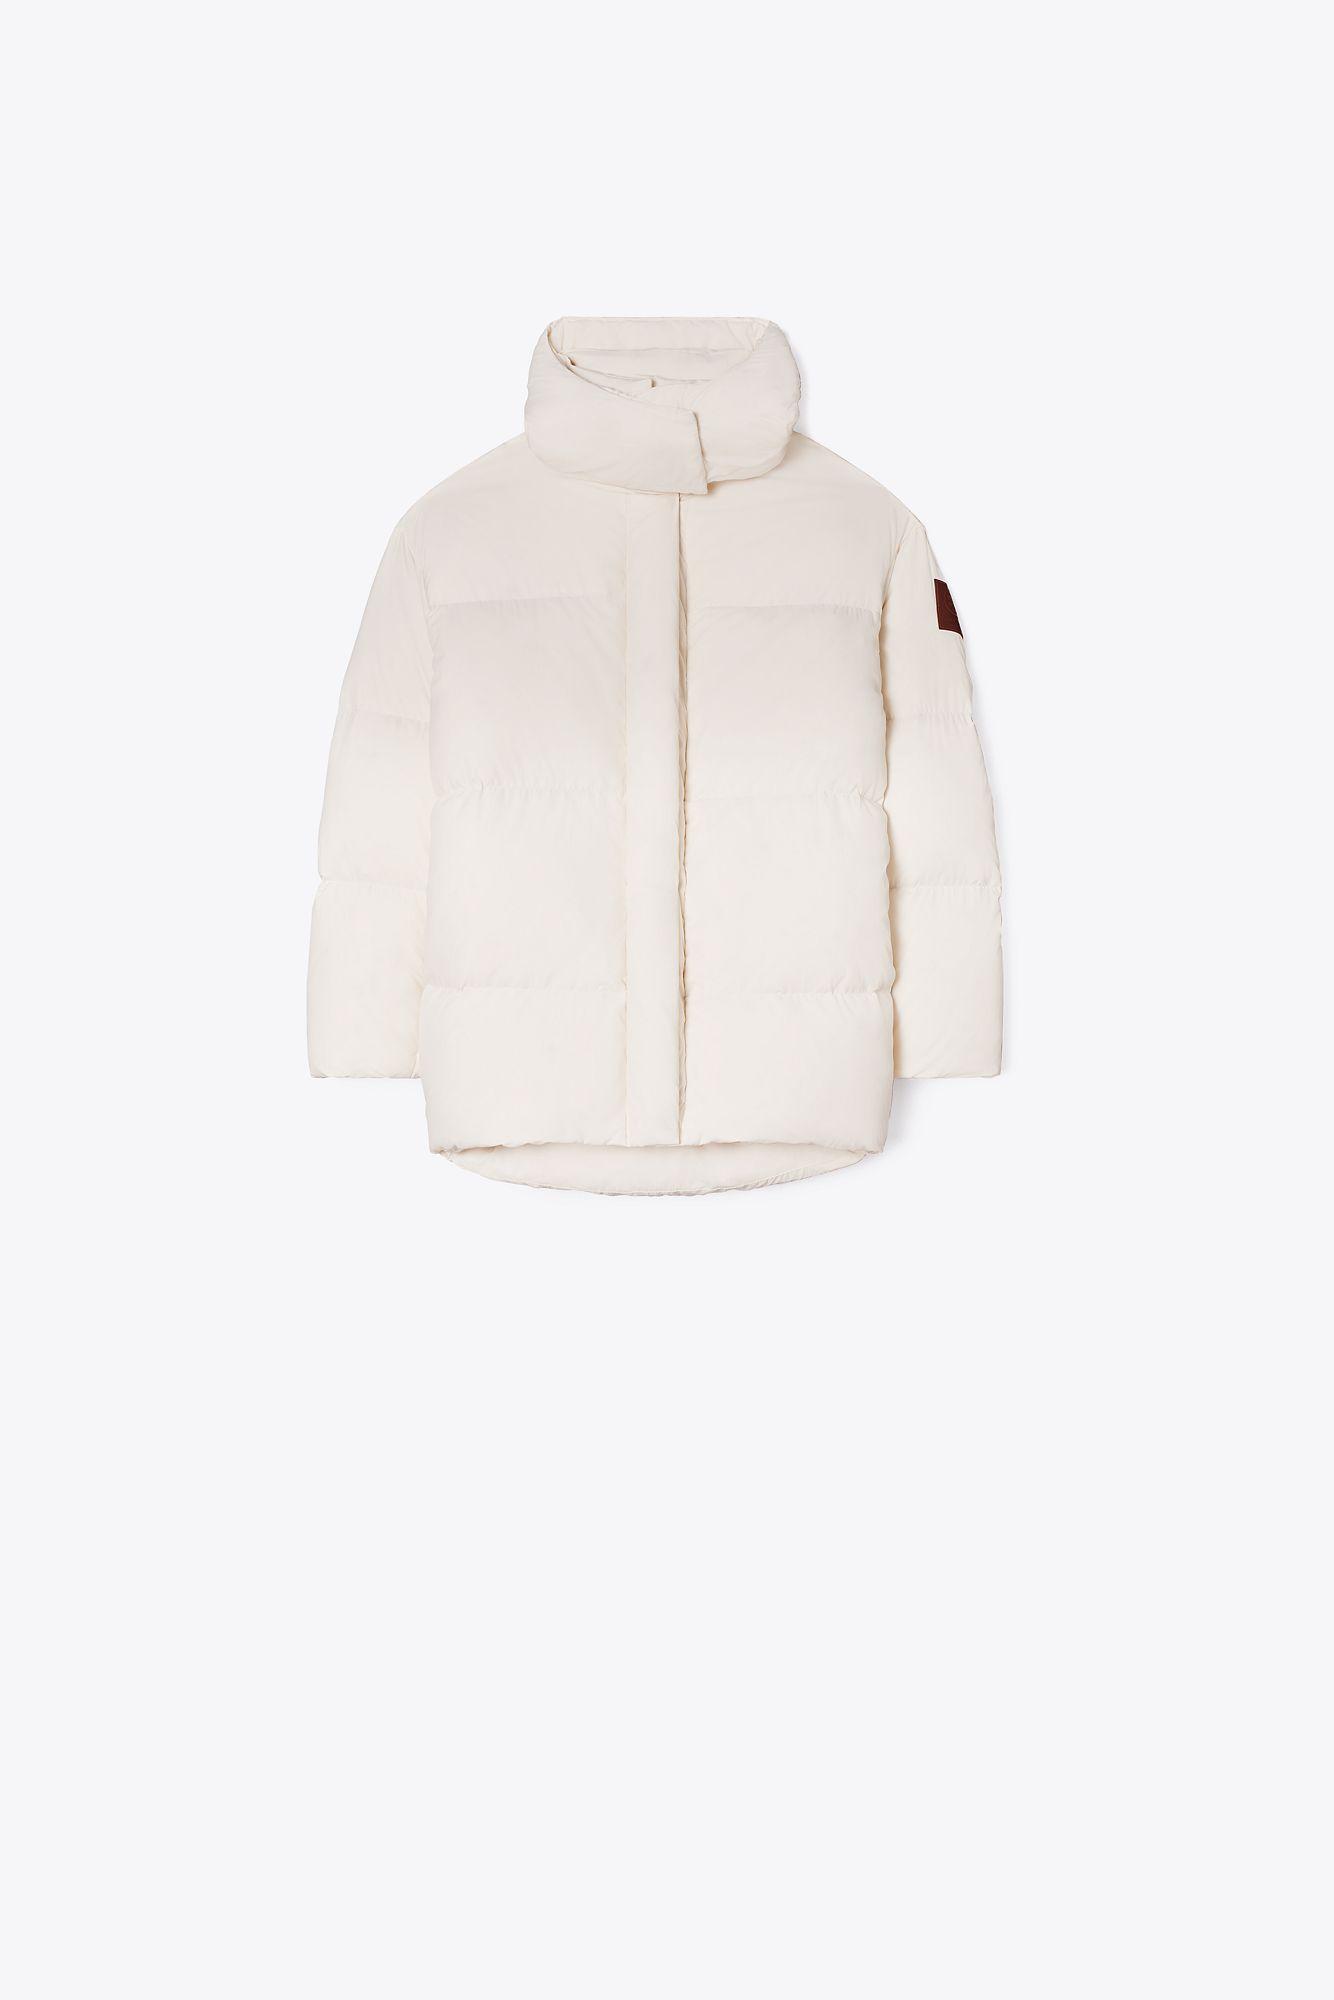 Tory Sport Tory Burch Mid-length Down Jacket in White | Lyst